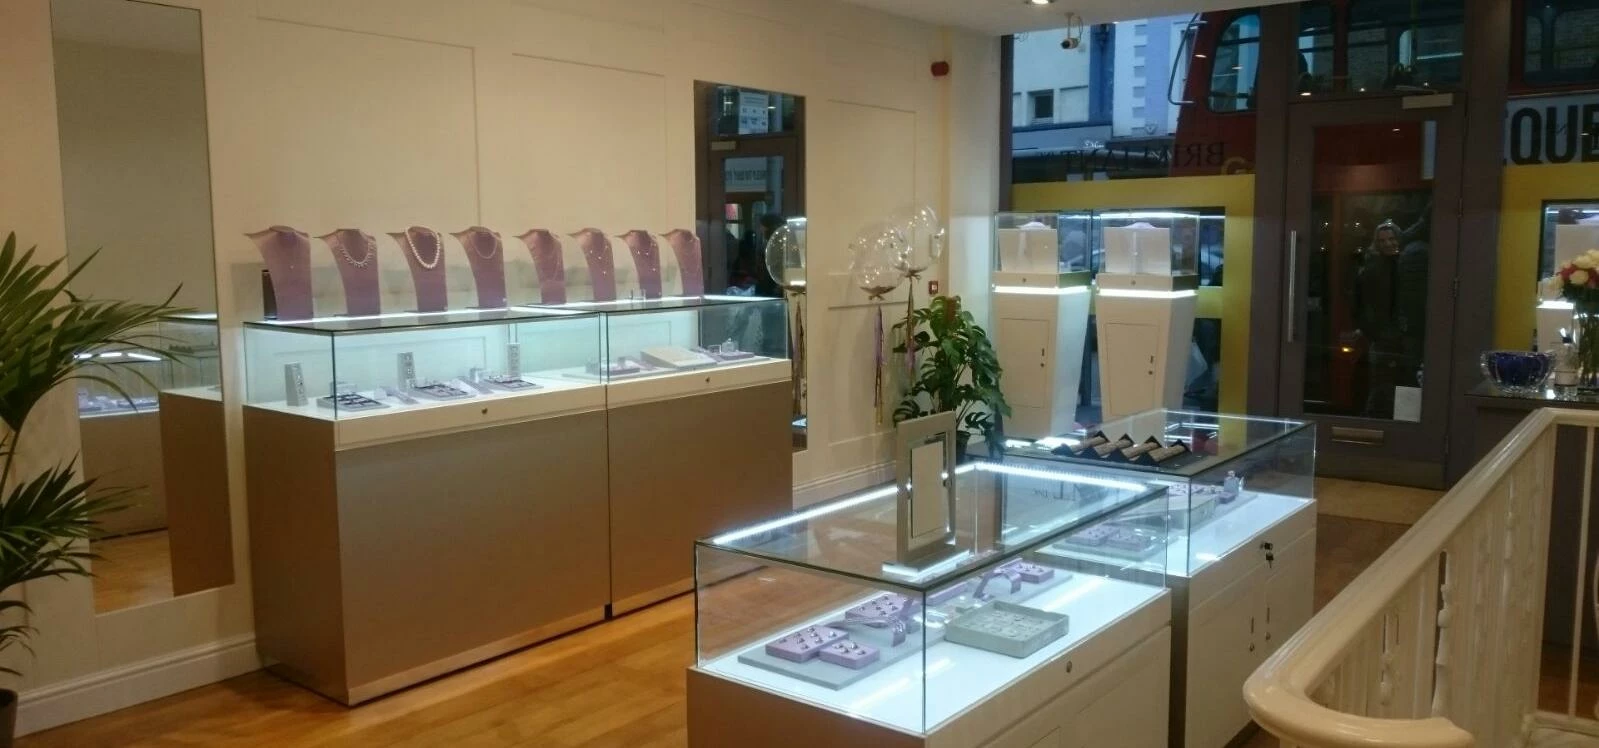 Inside Brilliant Inc's new boutique on King's Road.